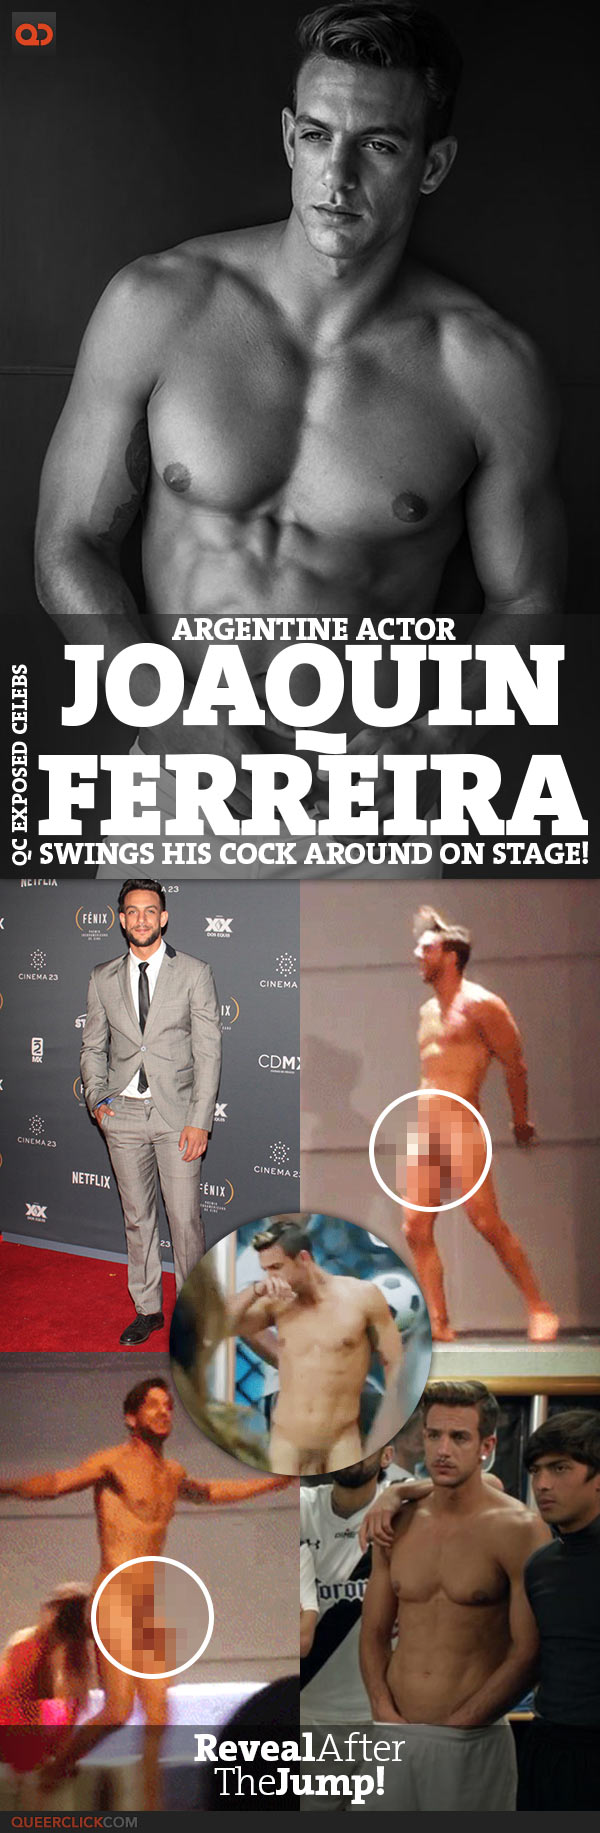 qc exposed celebs joaquin ferreira mexican actor naked swings his cock around on stage teaser